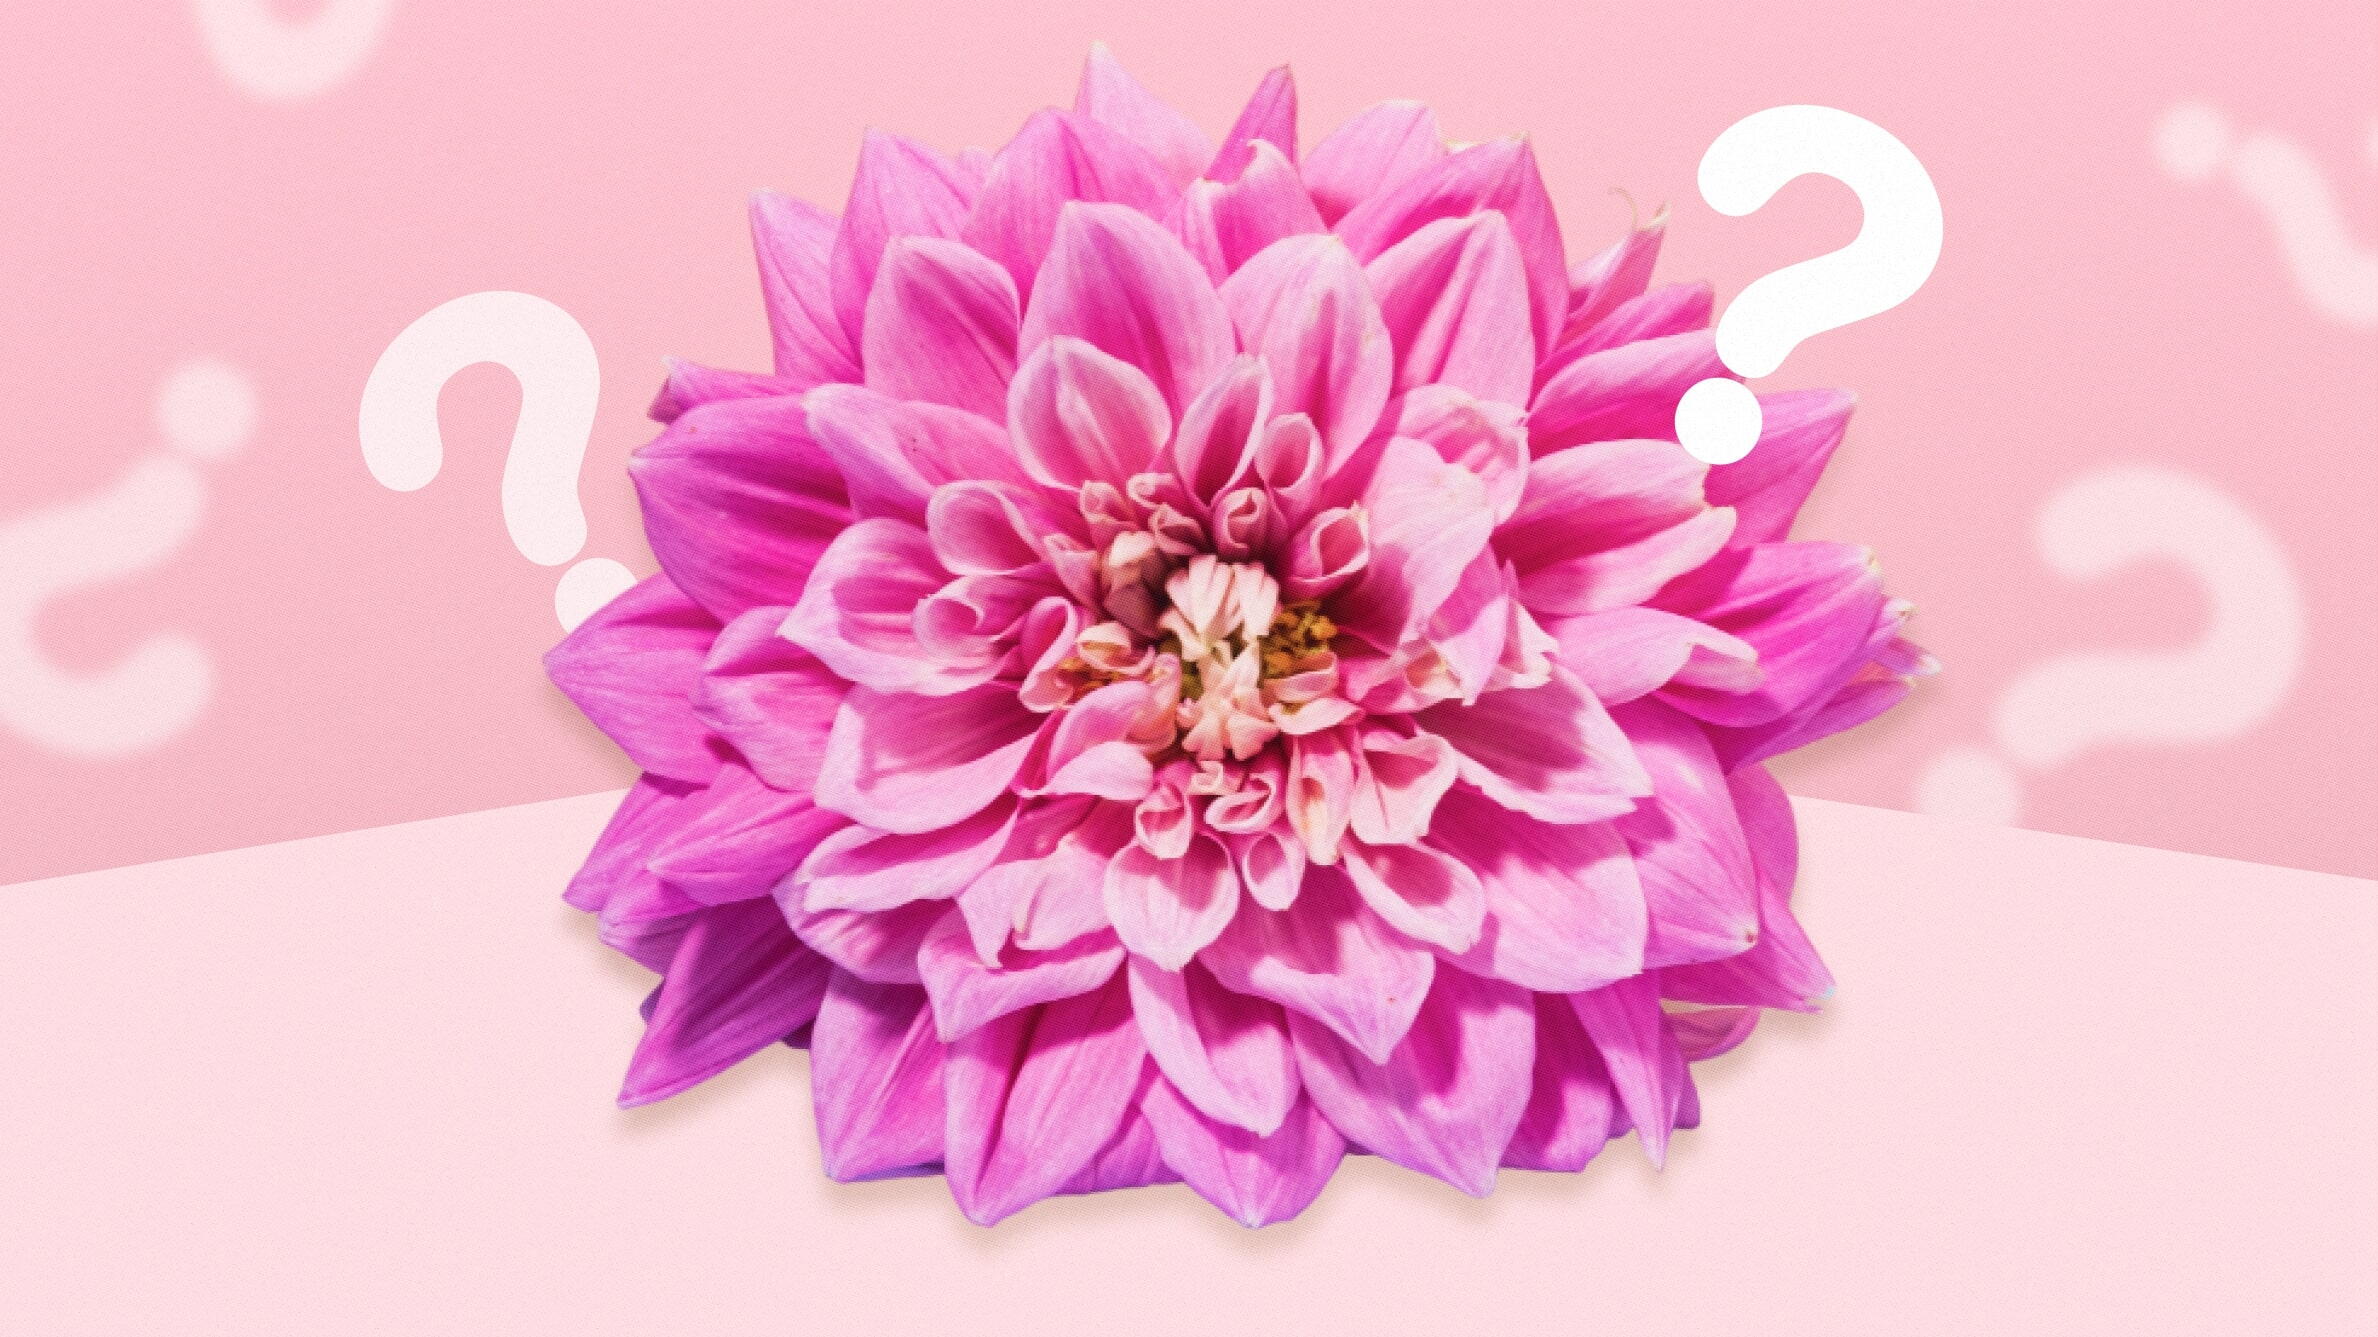 What is the meaning of Dahlia flower